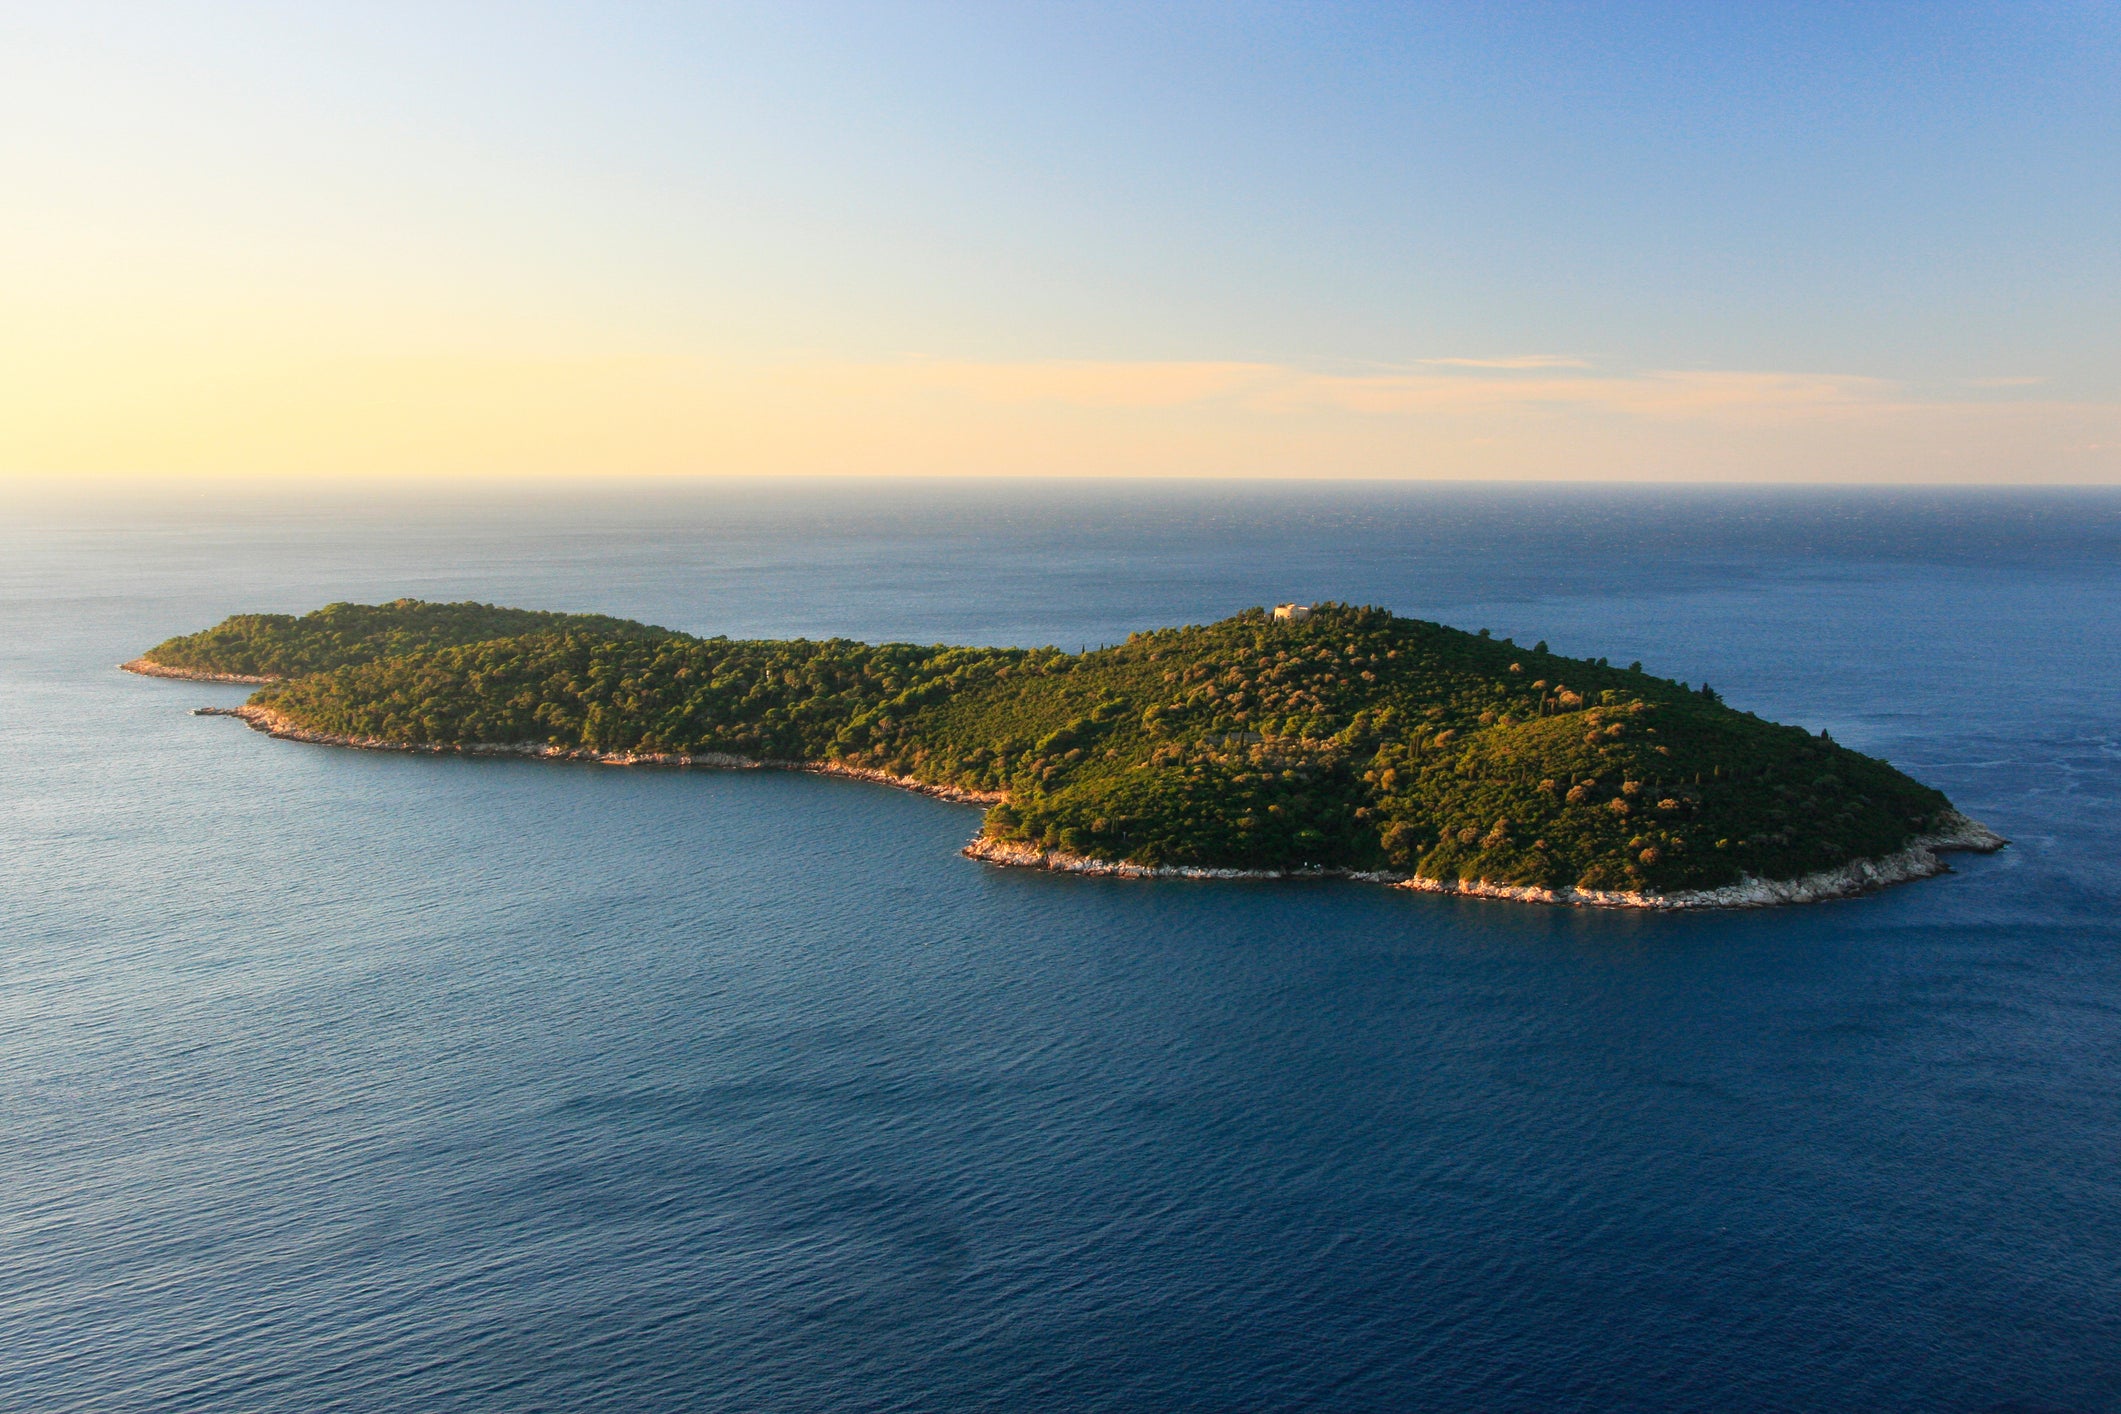 The island Lokrum is only 600m from Dubrovnik